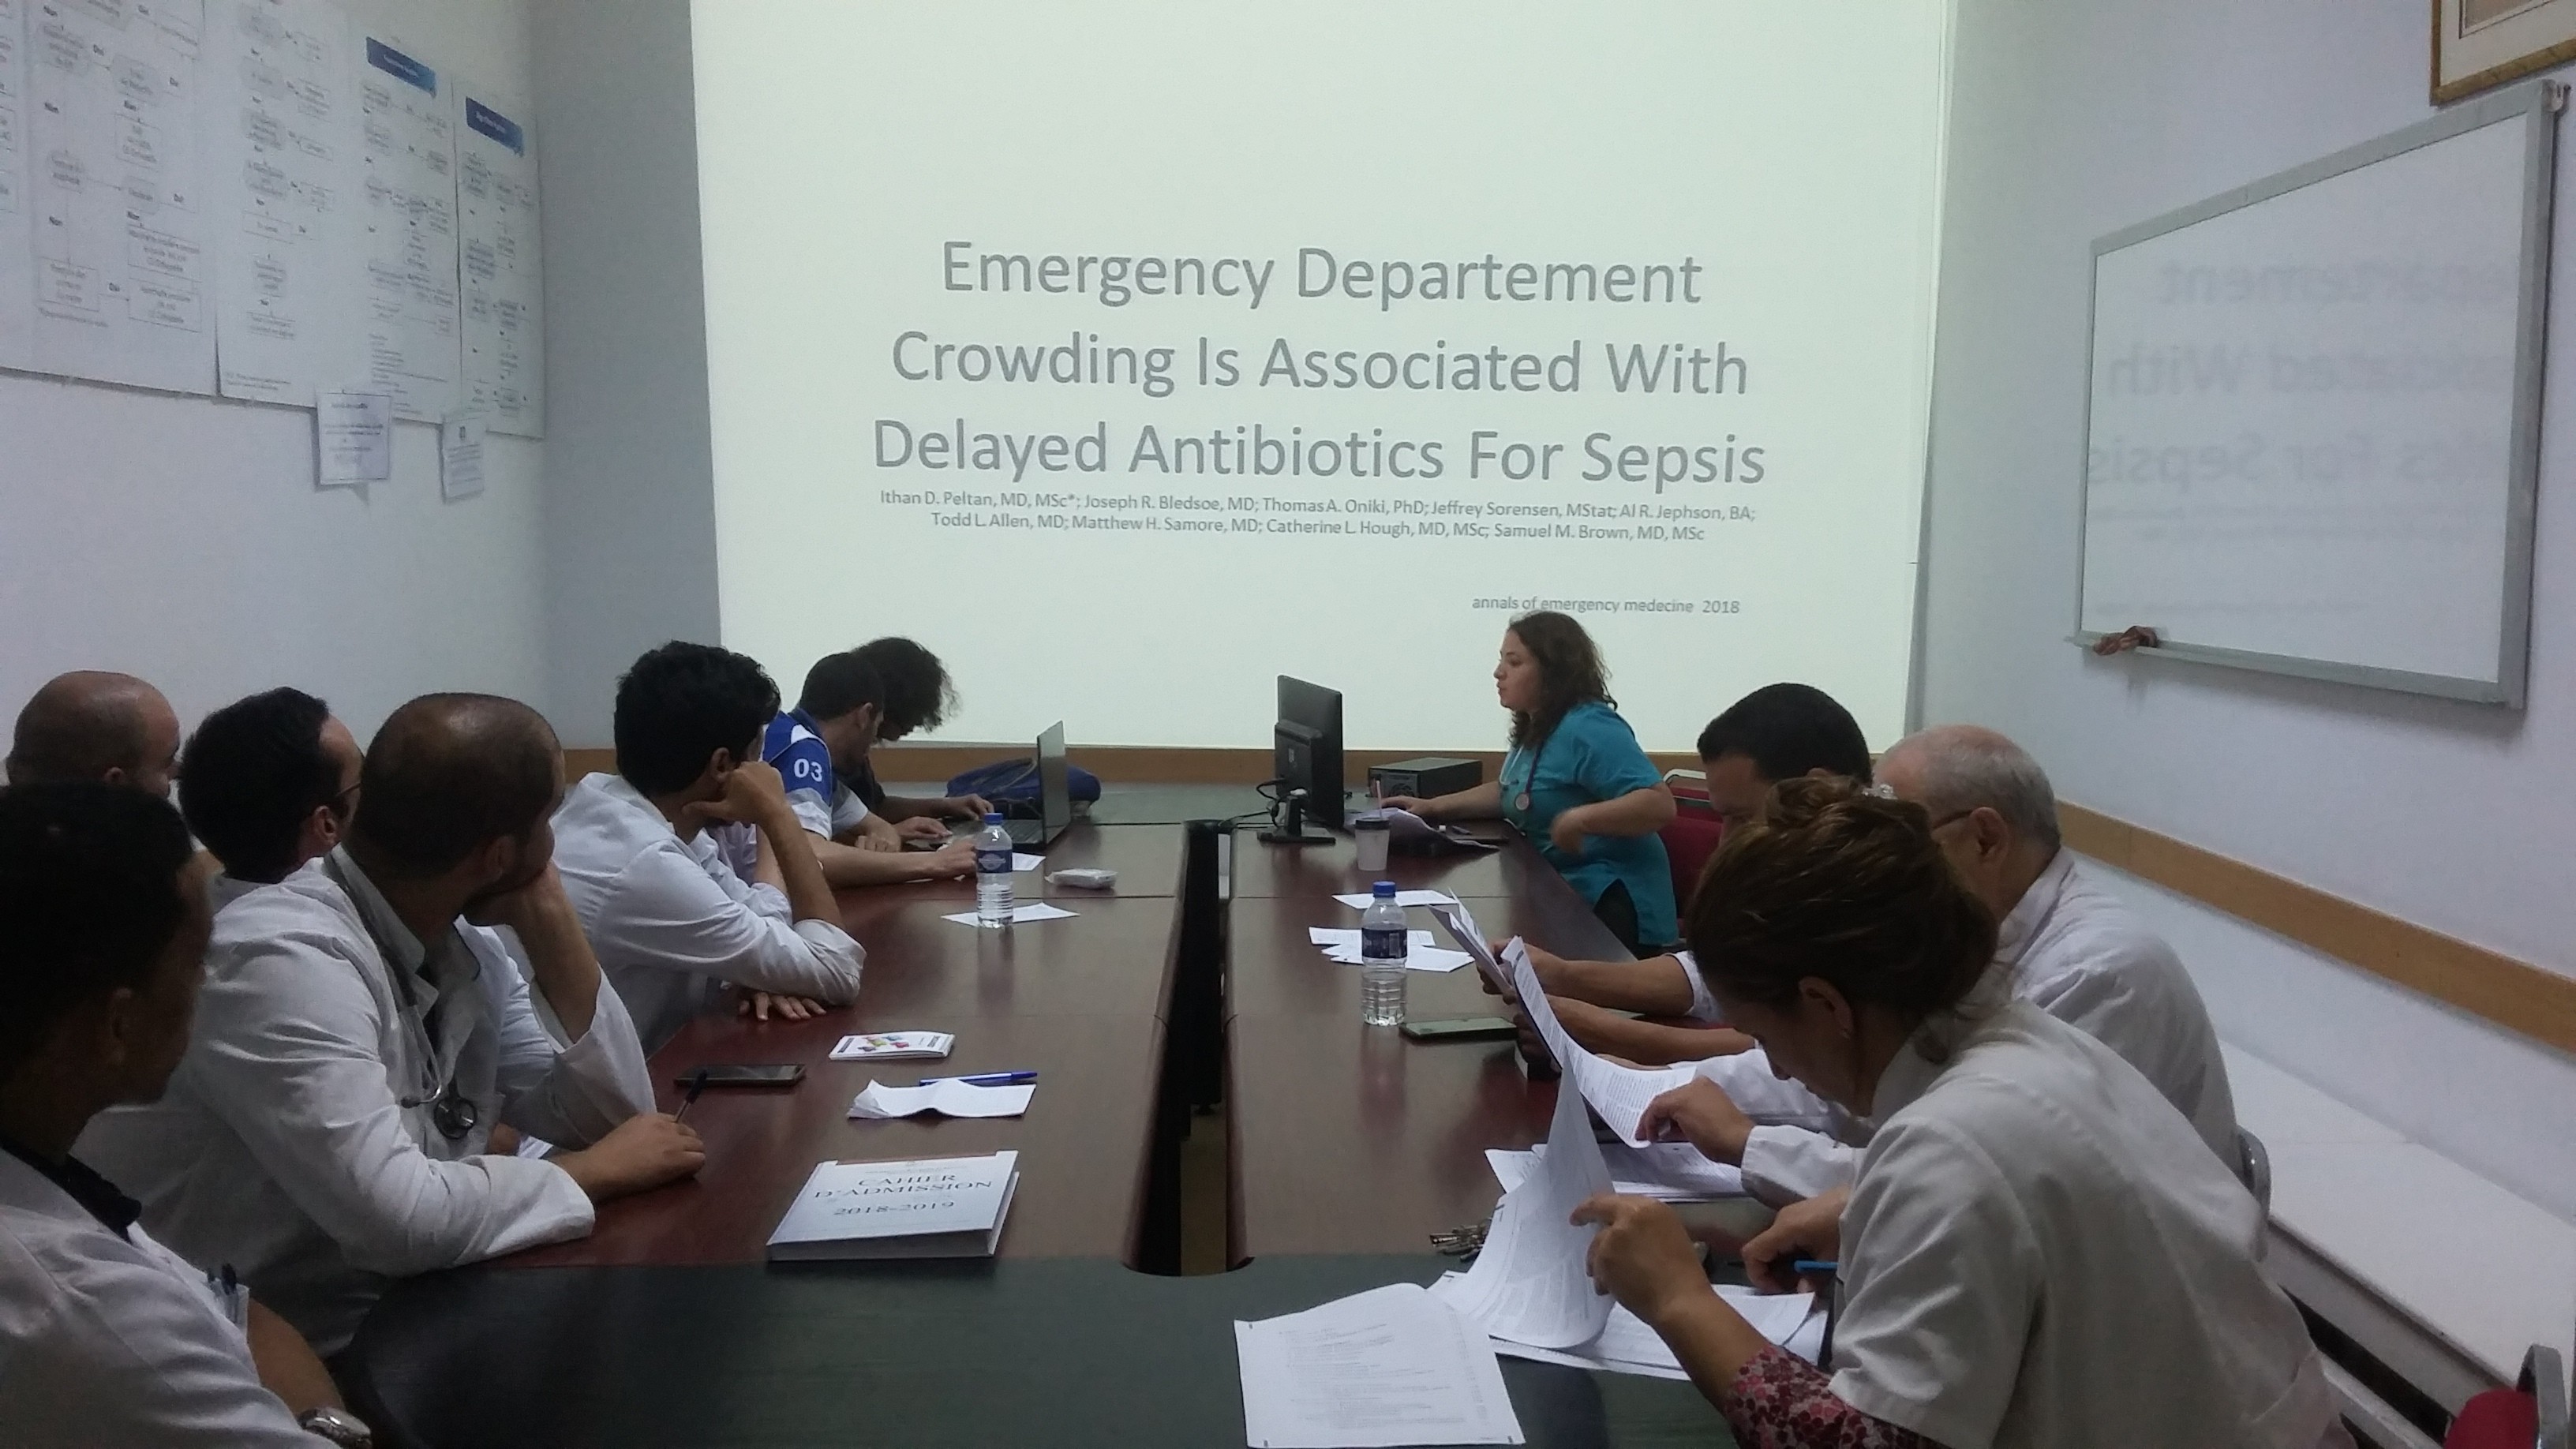 Emergency Department Crowding Is Associated with Delayed Antibiotics For Sepsis